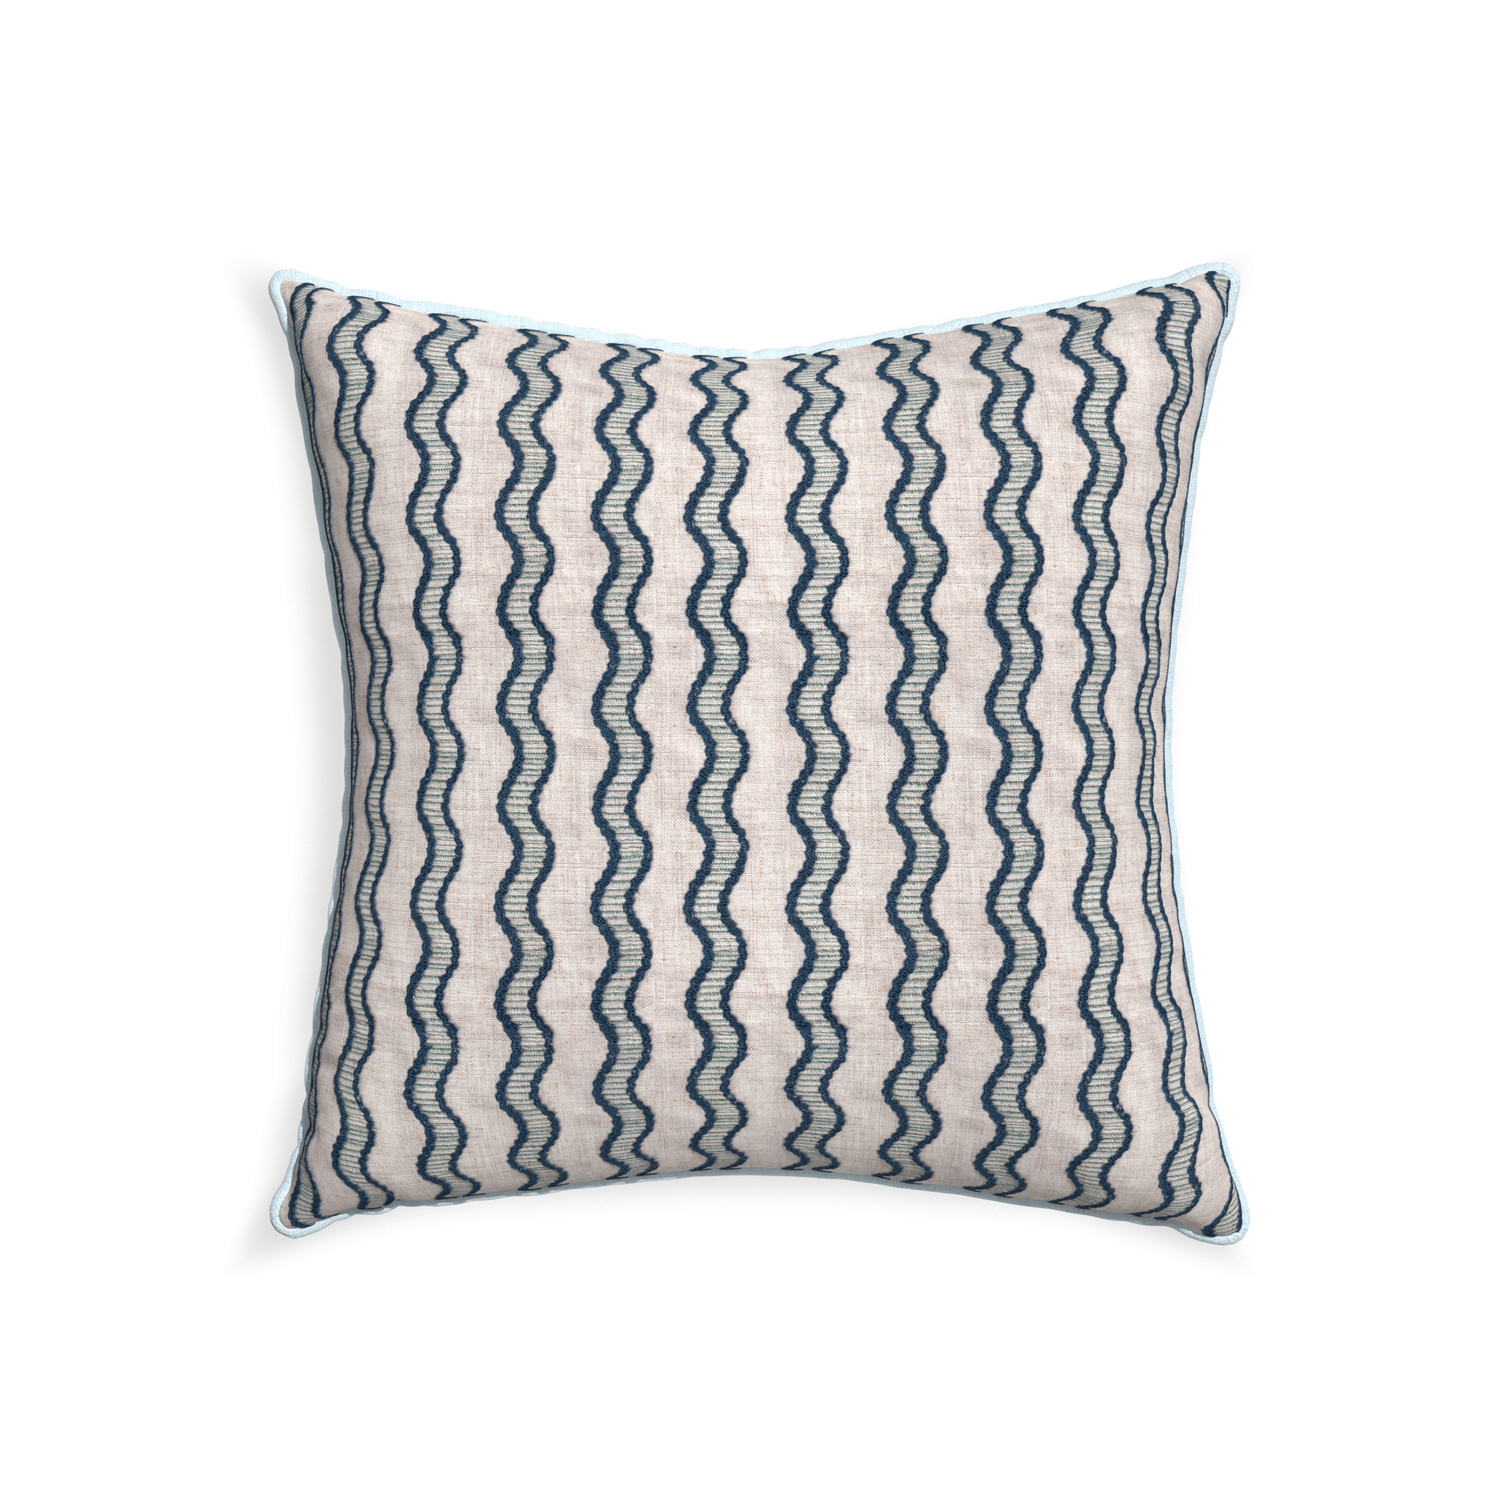 22-square beatrice custom embroidered wavepillow with powder piping on white background